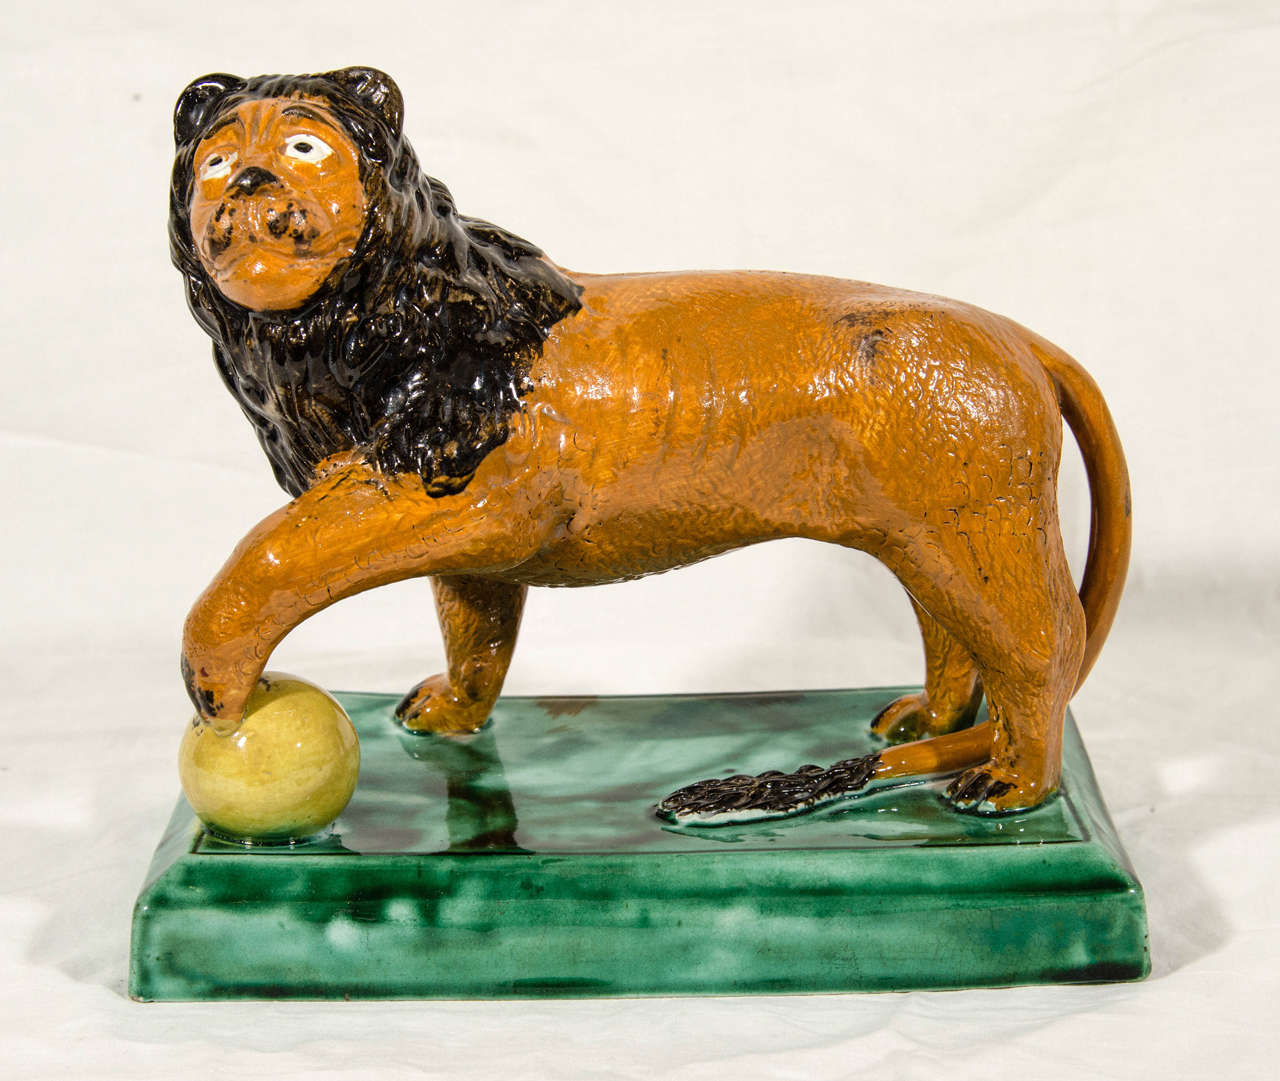 A good antique Staffordshire pottery figure of a standing lion with paw on globe. The modeling of the face is exceptional making this figure very appealing.The figure has a  slightly comical aspect probably not intended at the time of making.